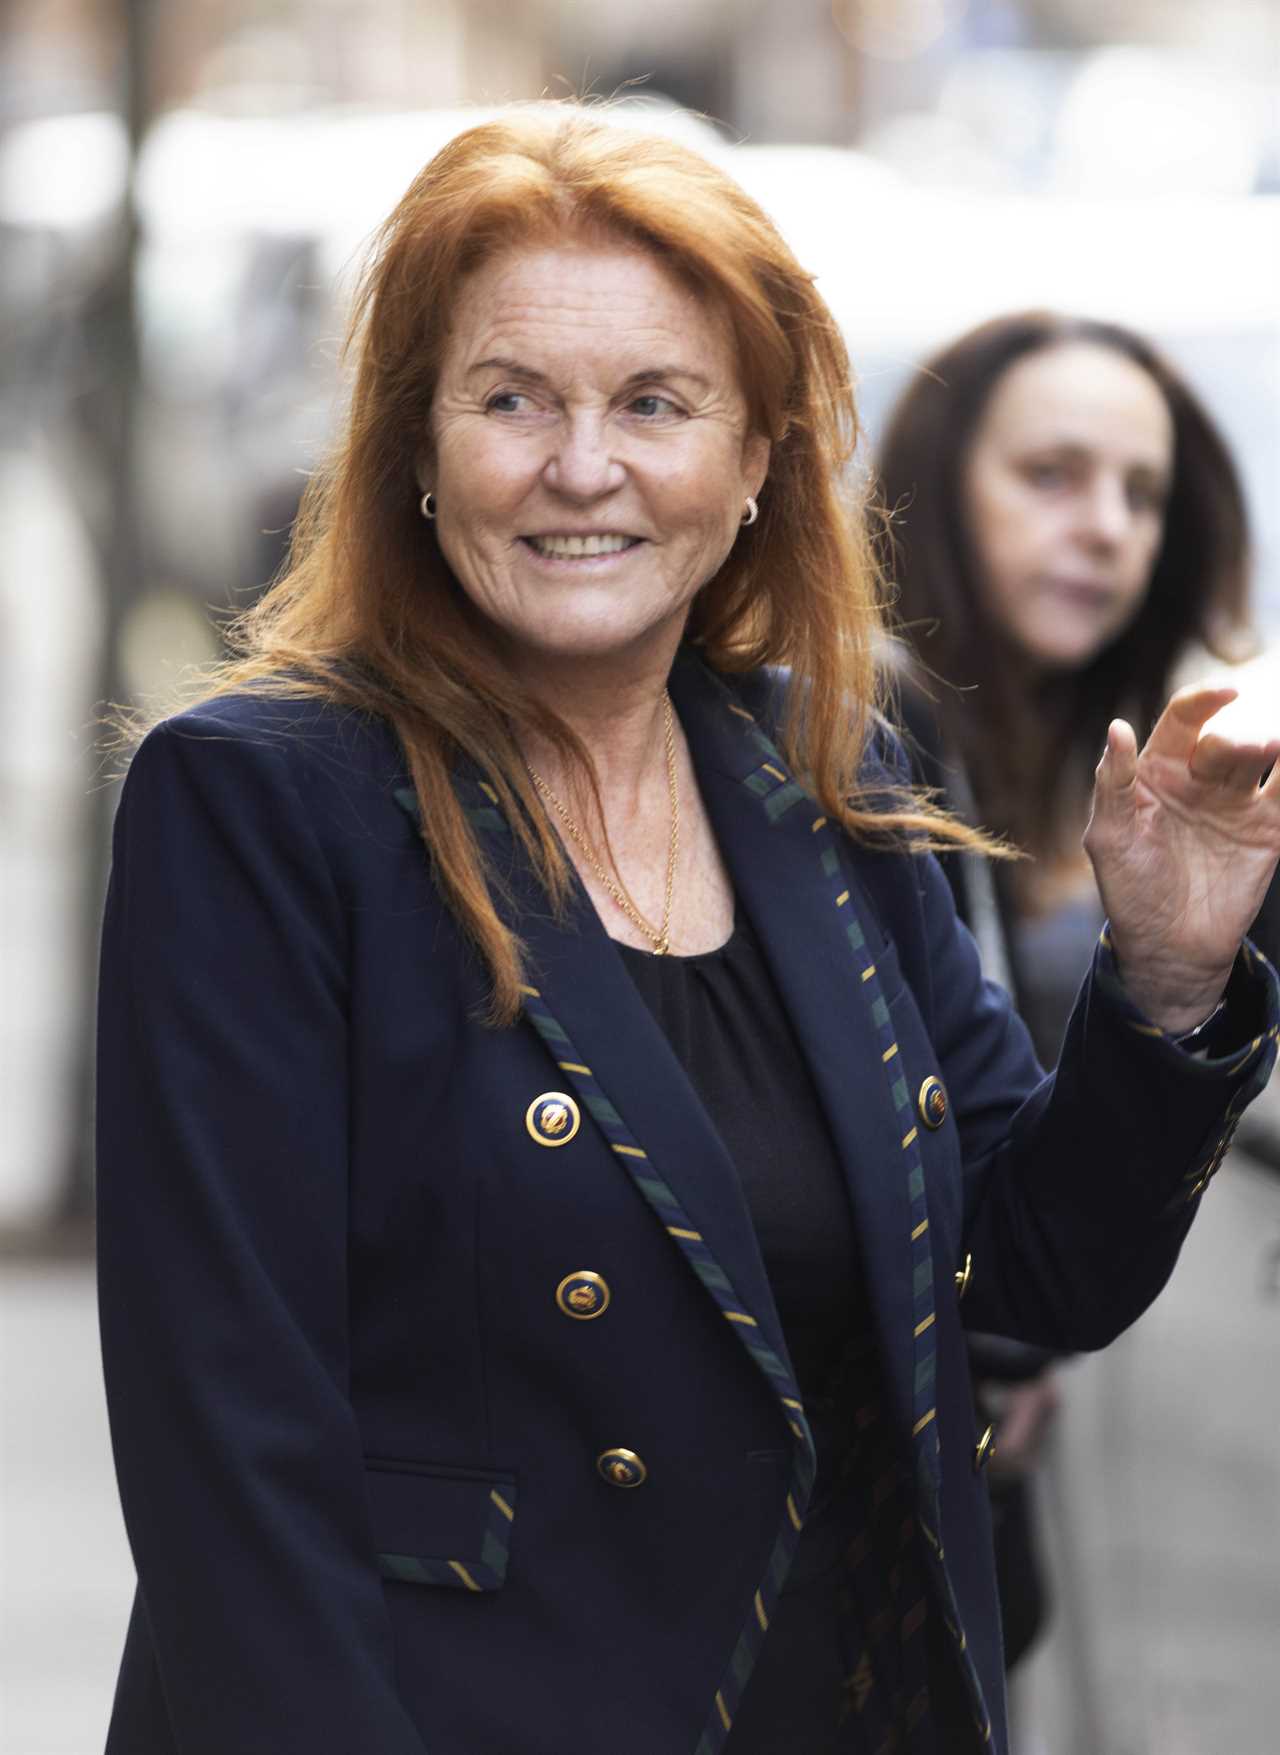 King Charles and Sarah Ferguson Supporting Each Other Through Cancer Battles